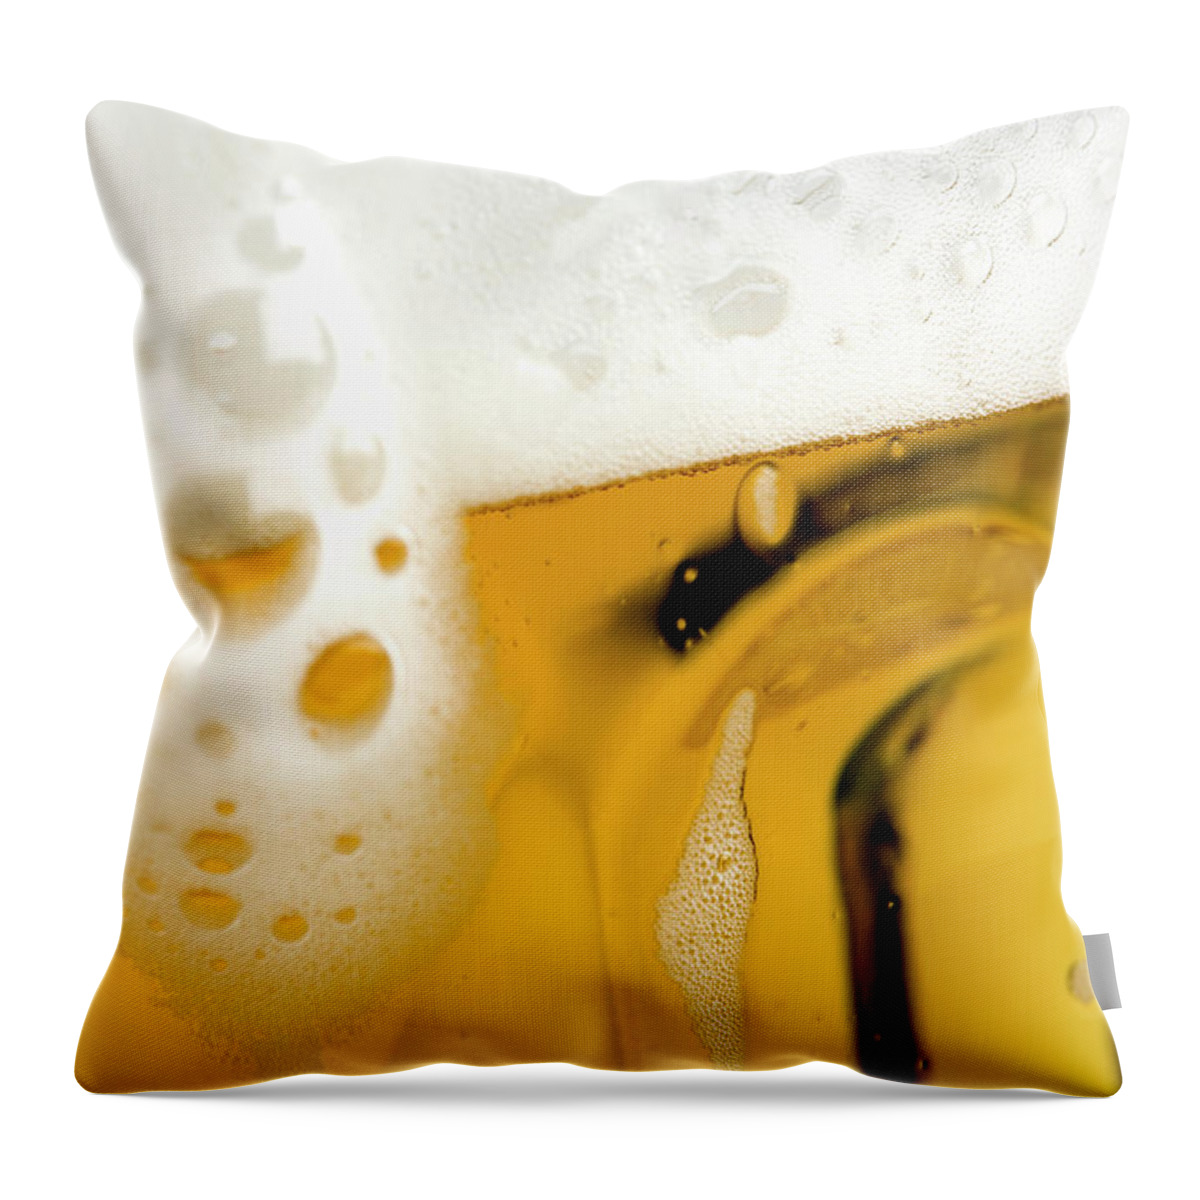 Alcohol Throw Pillow featuring the photograph A Glass Of Beer by Caspar Benson